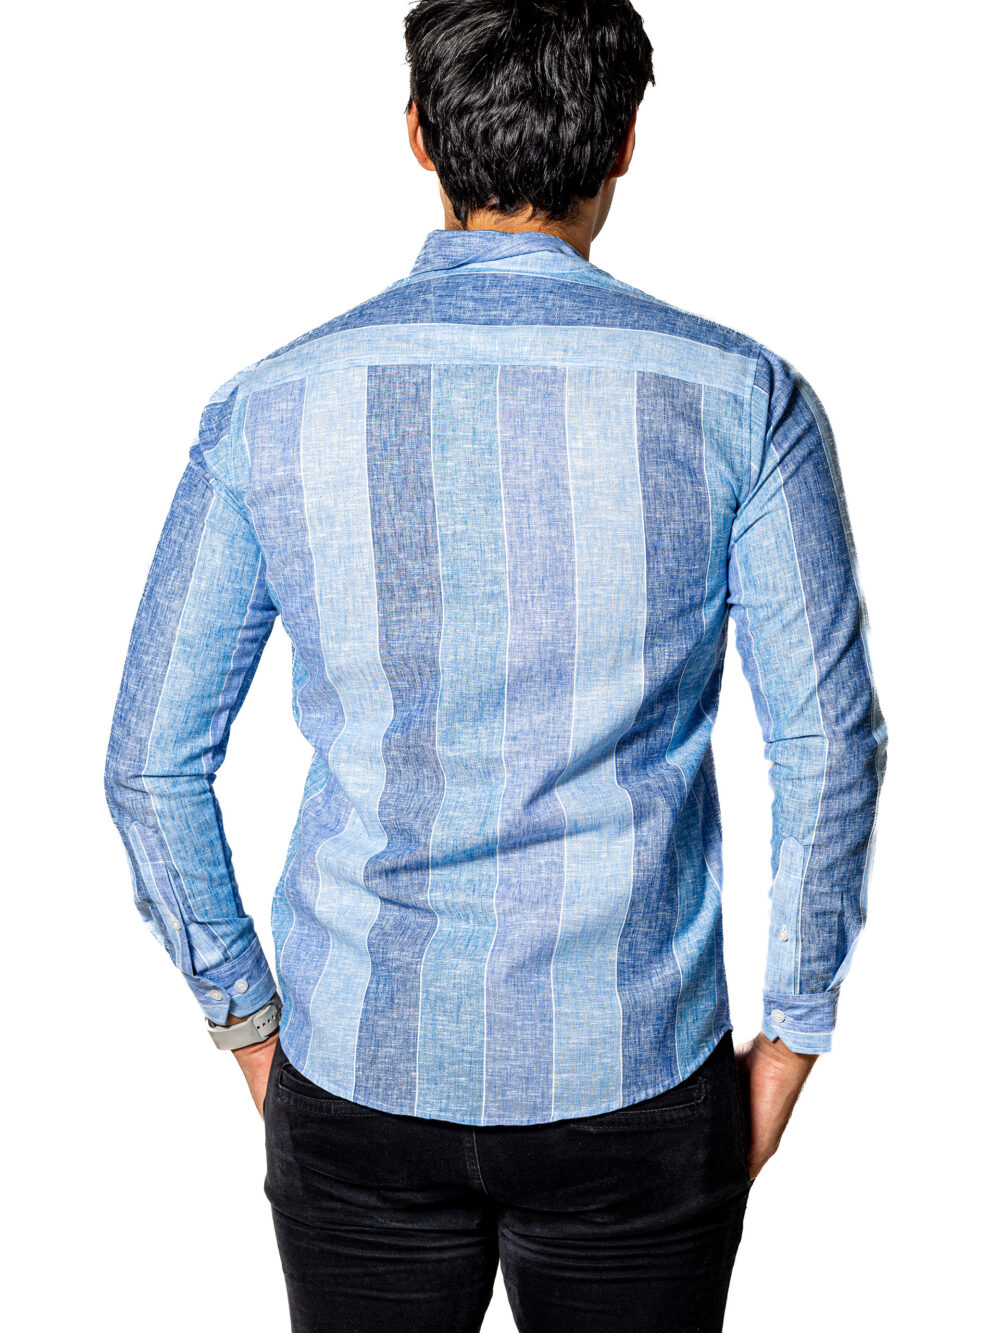 Camisa Hombre Casual Slim Fit Rayas Azules 4